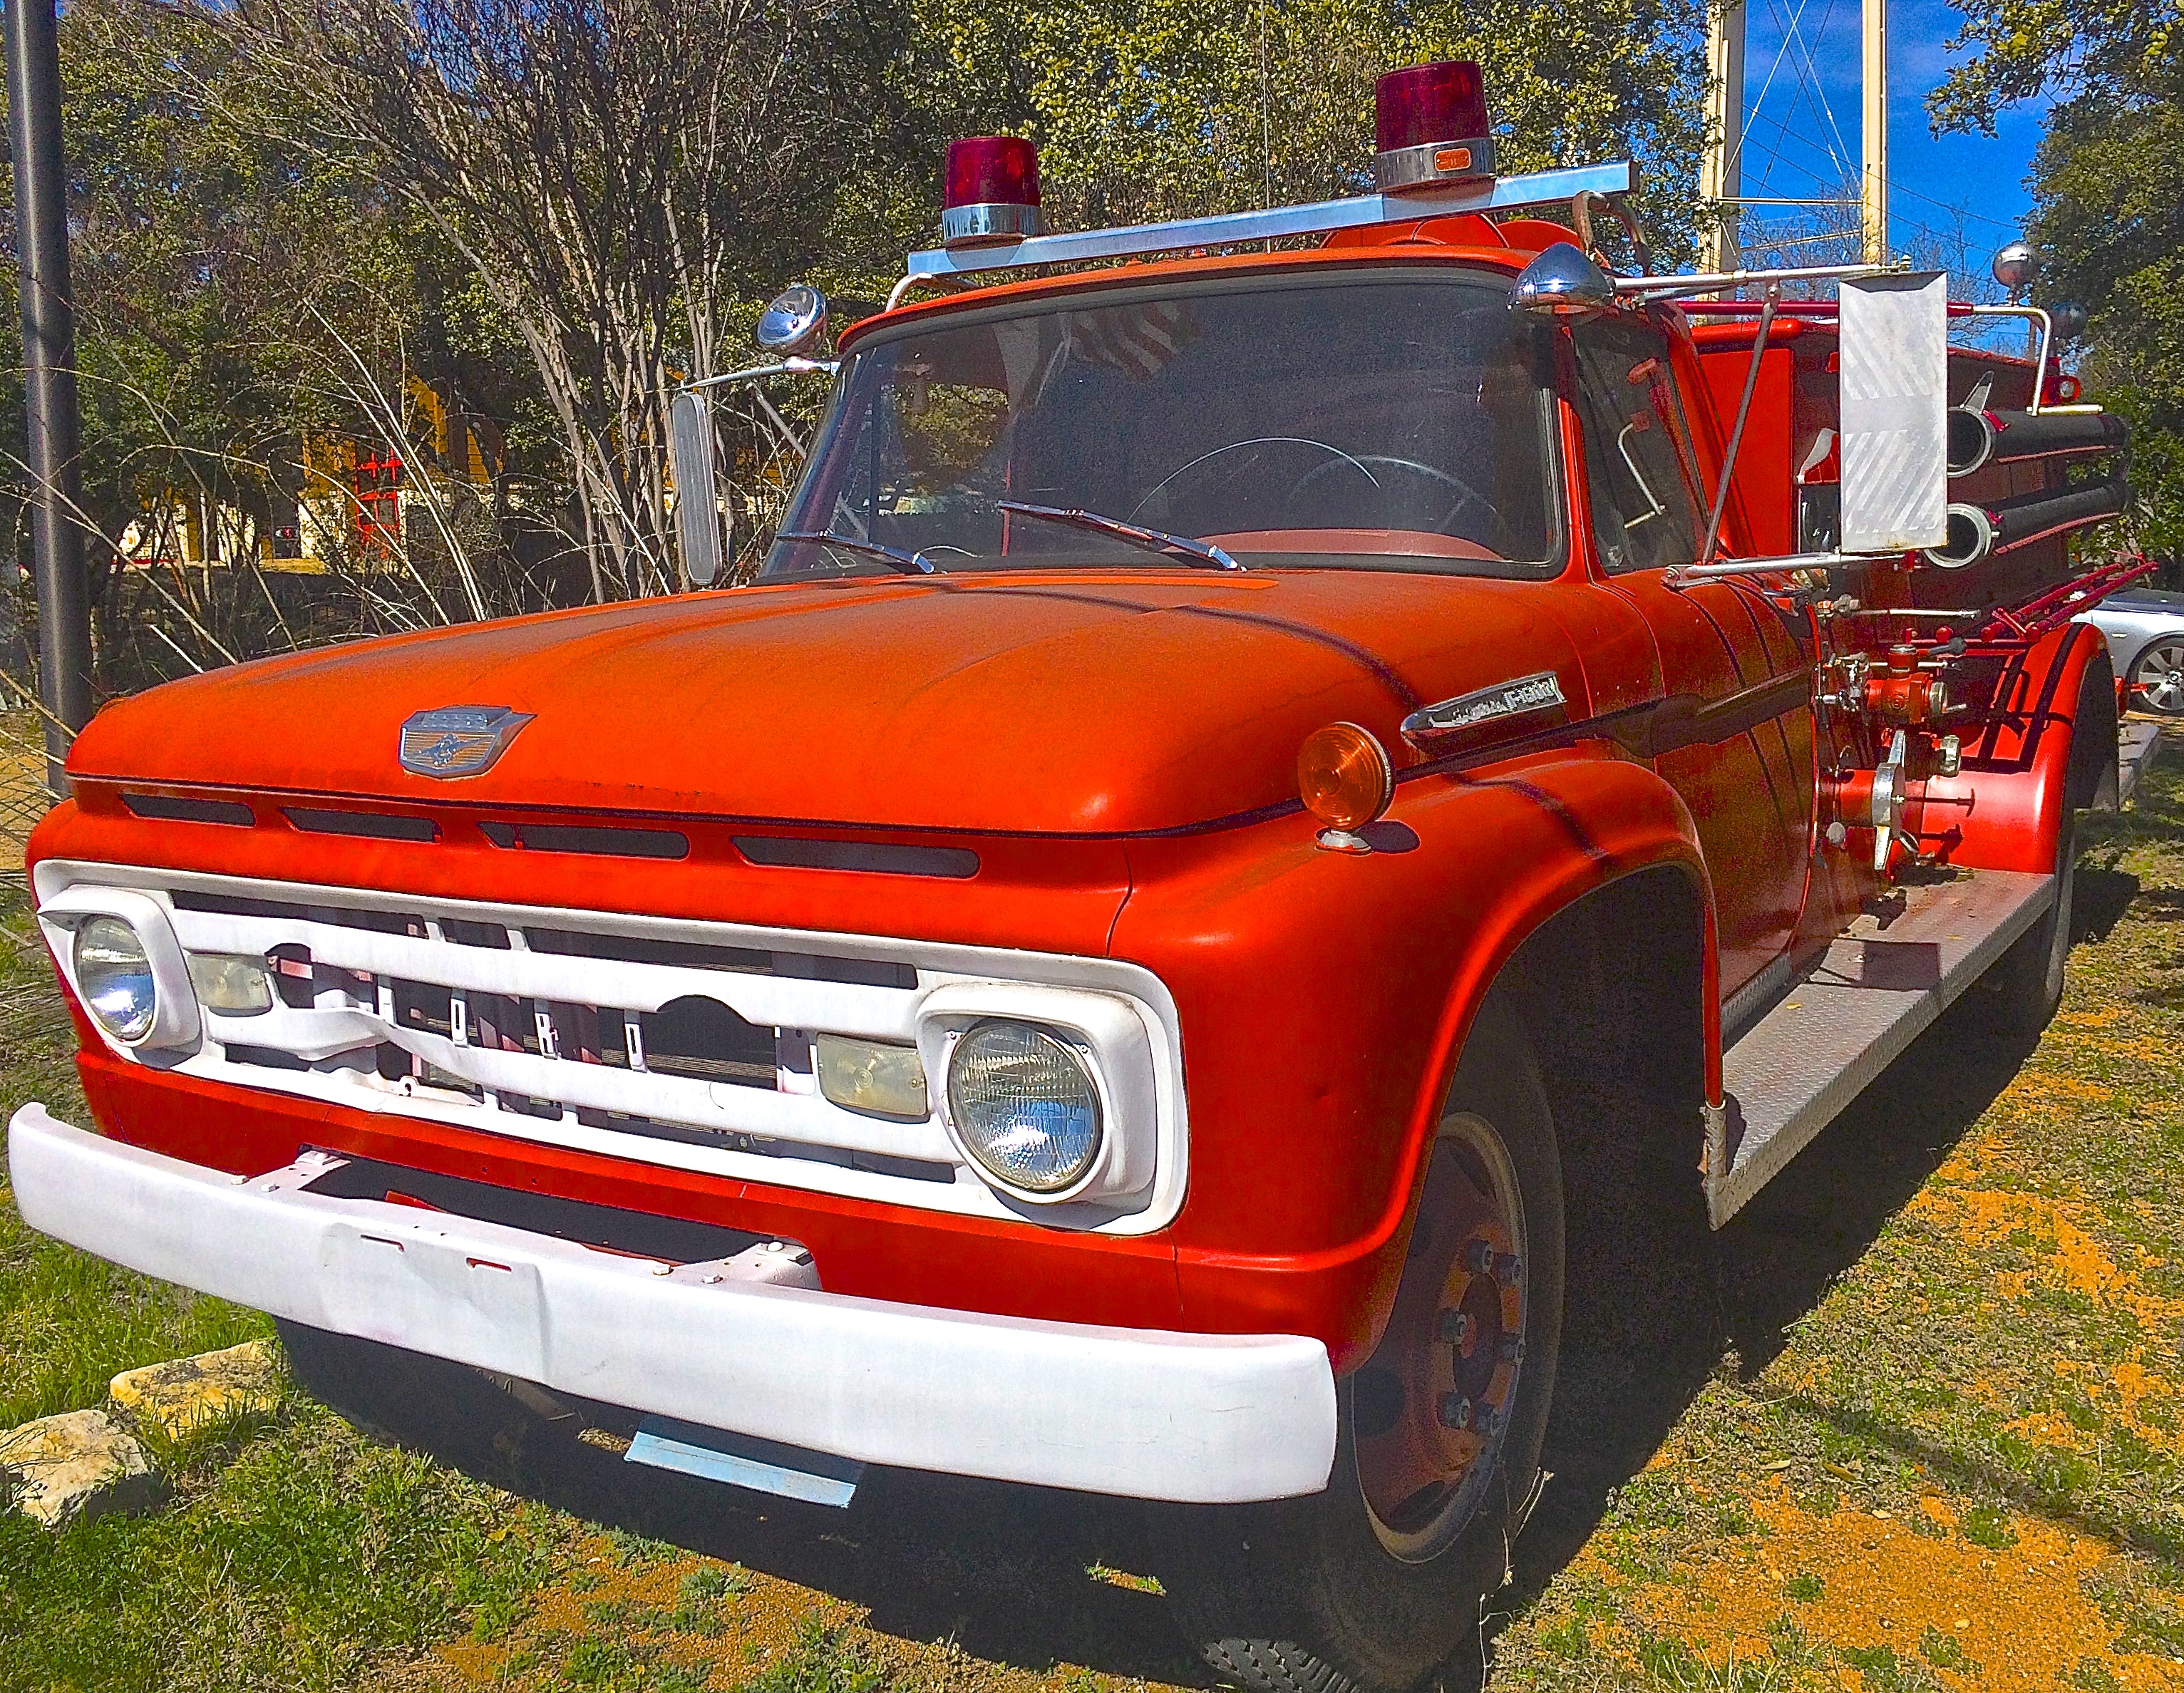 Old ford fire trucks #1